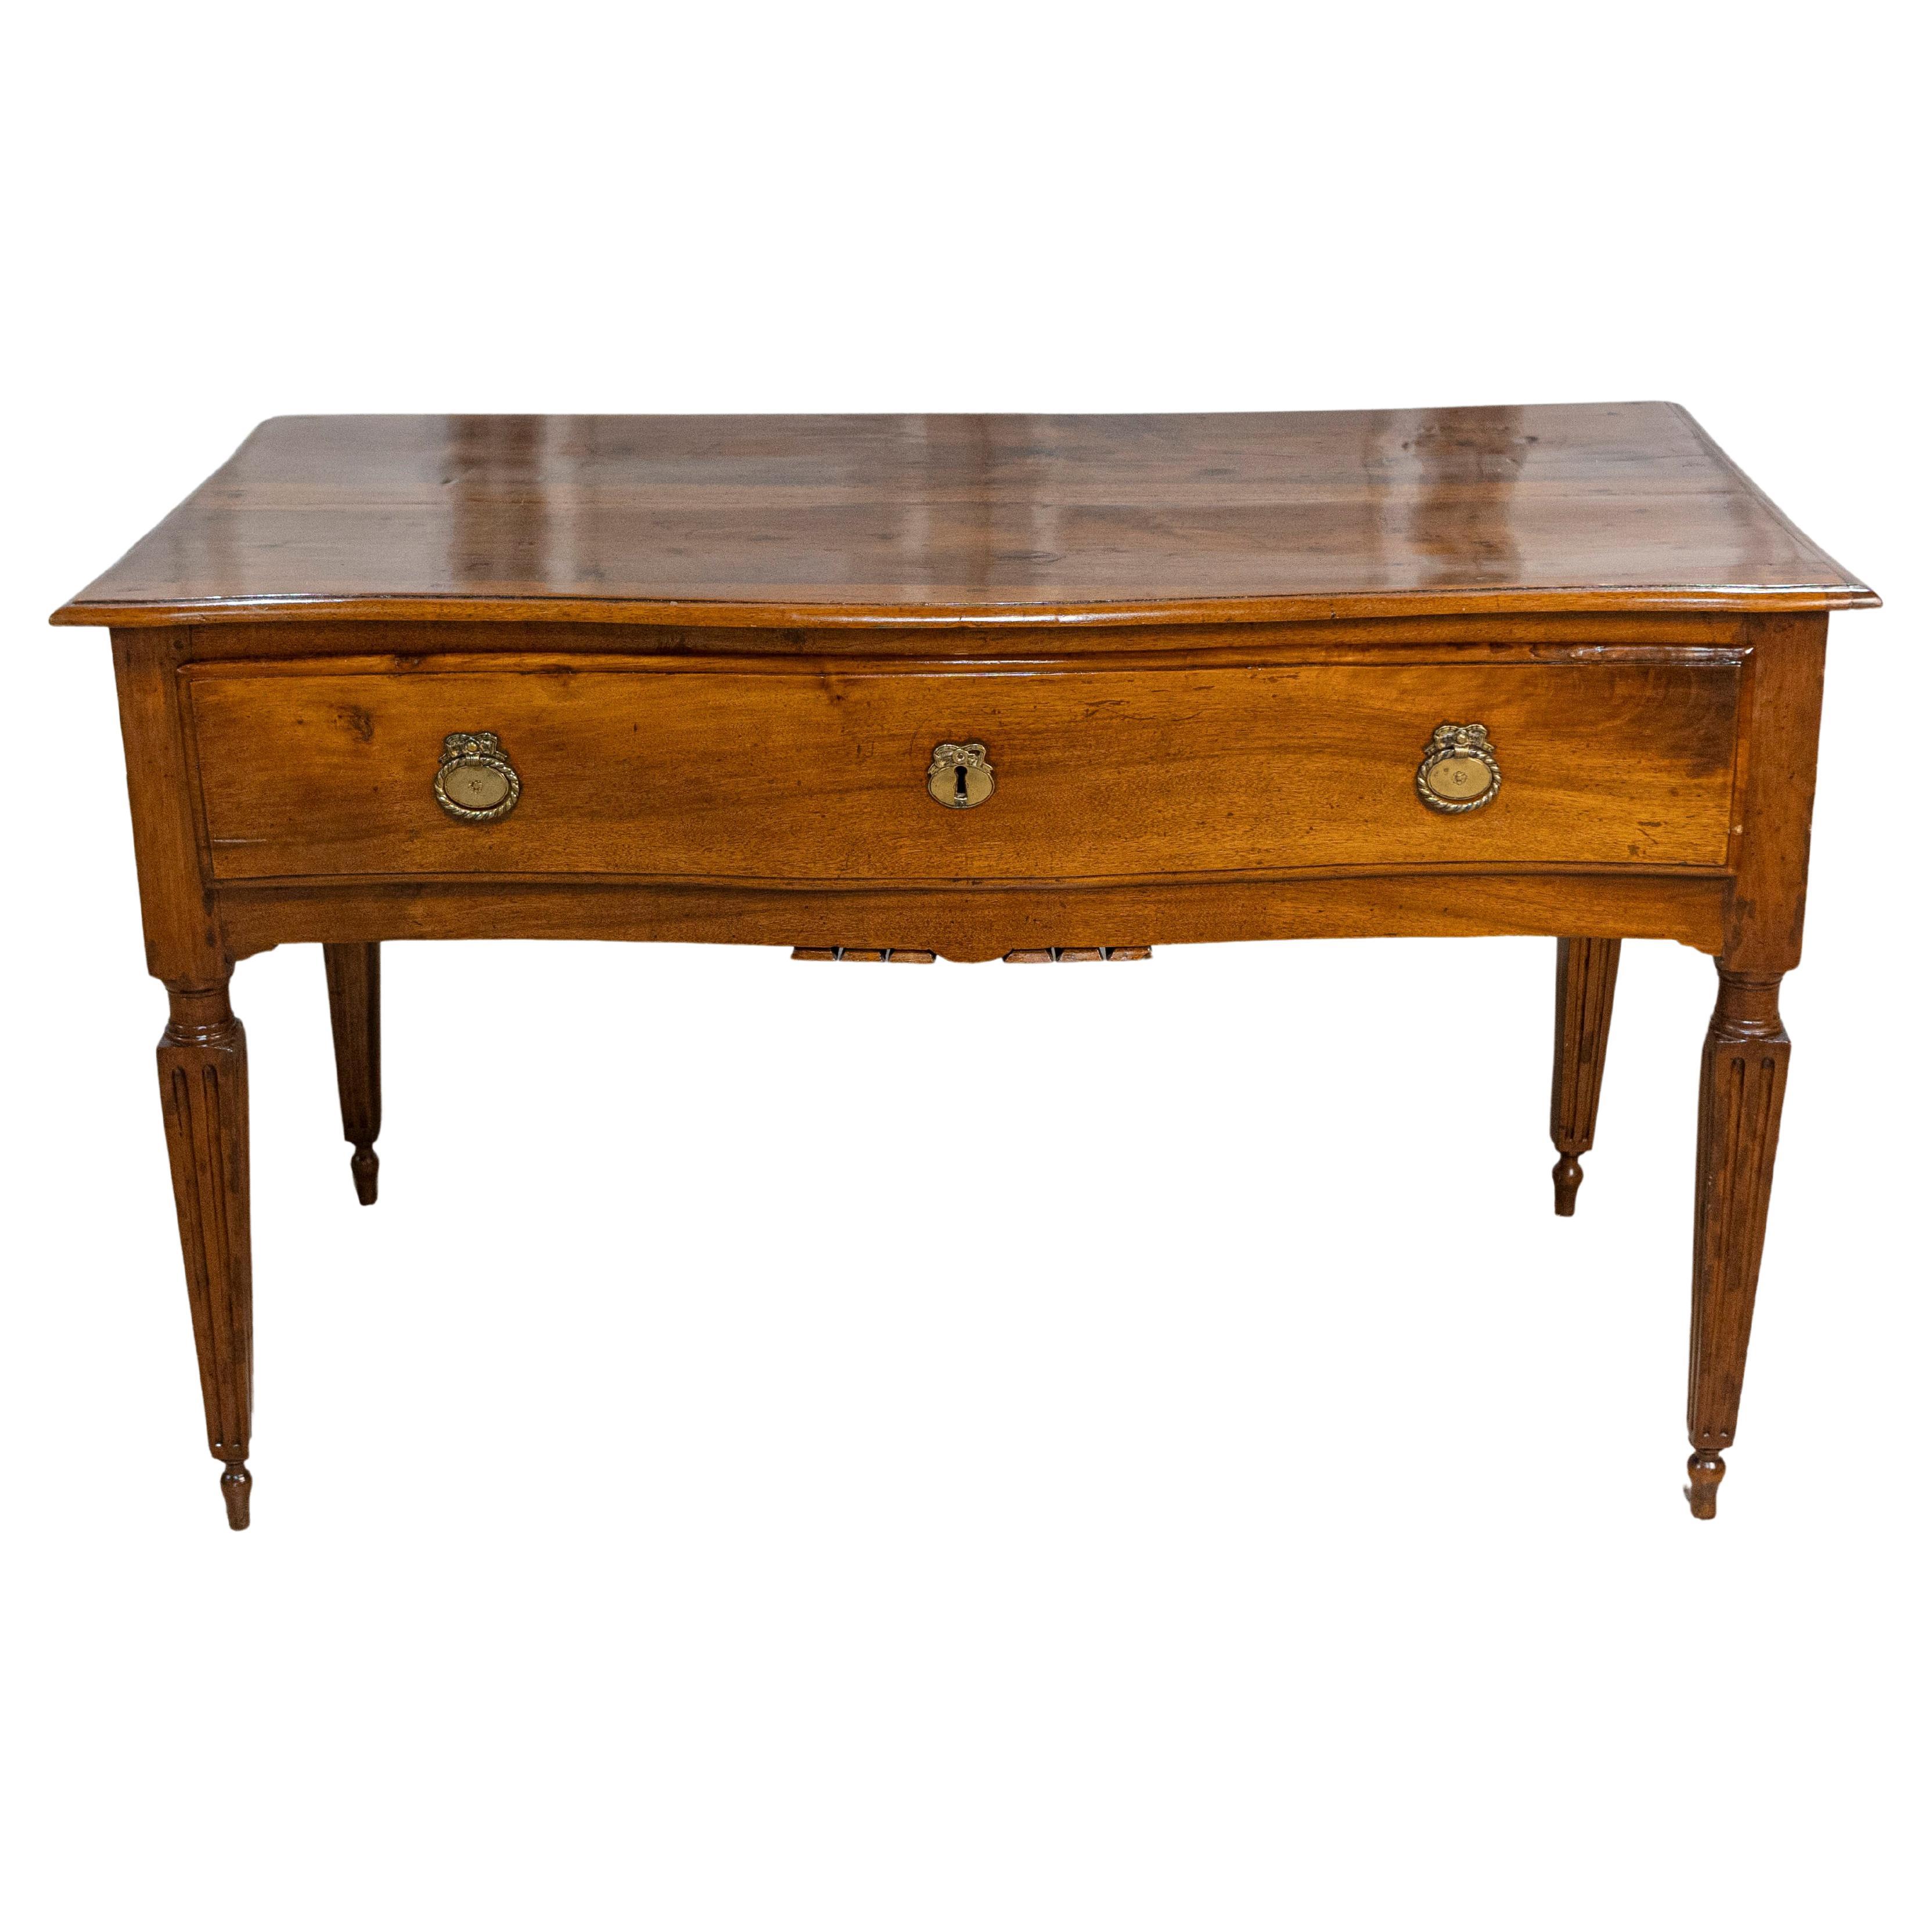 Italian Louis XVI 18th Century Walnut Console Table with Carved Fluted Legs